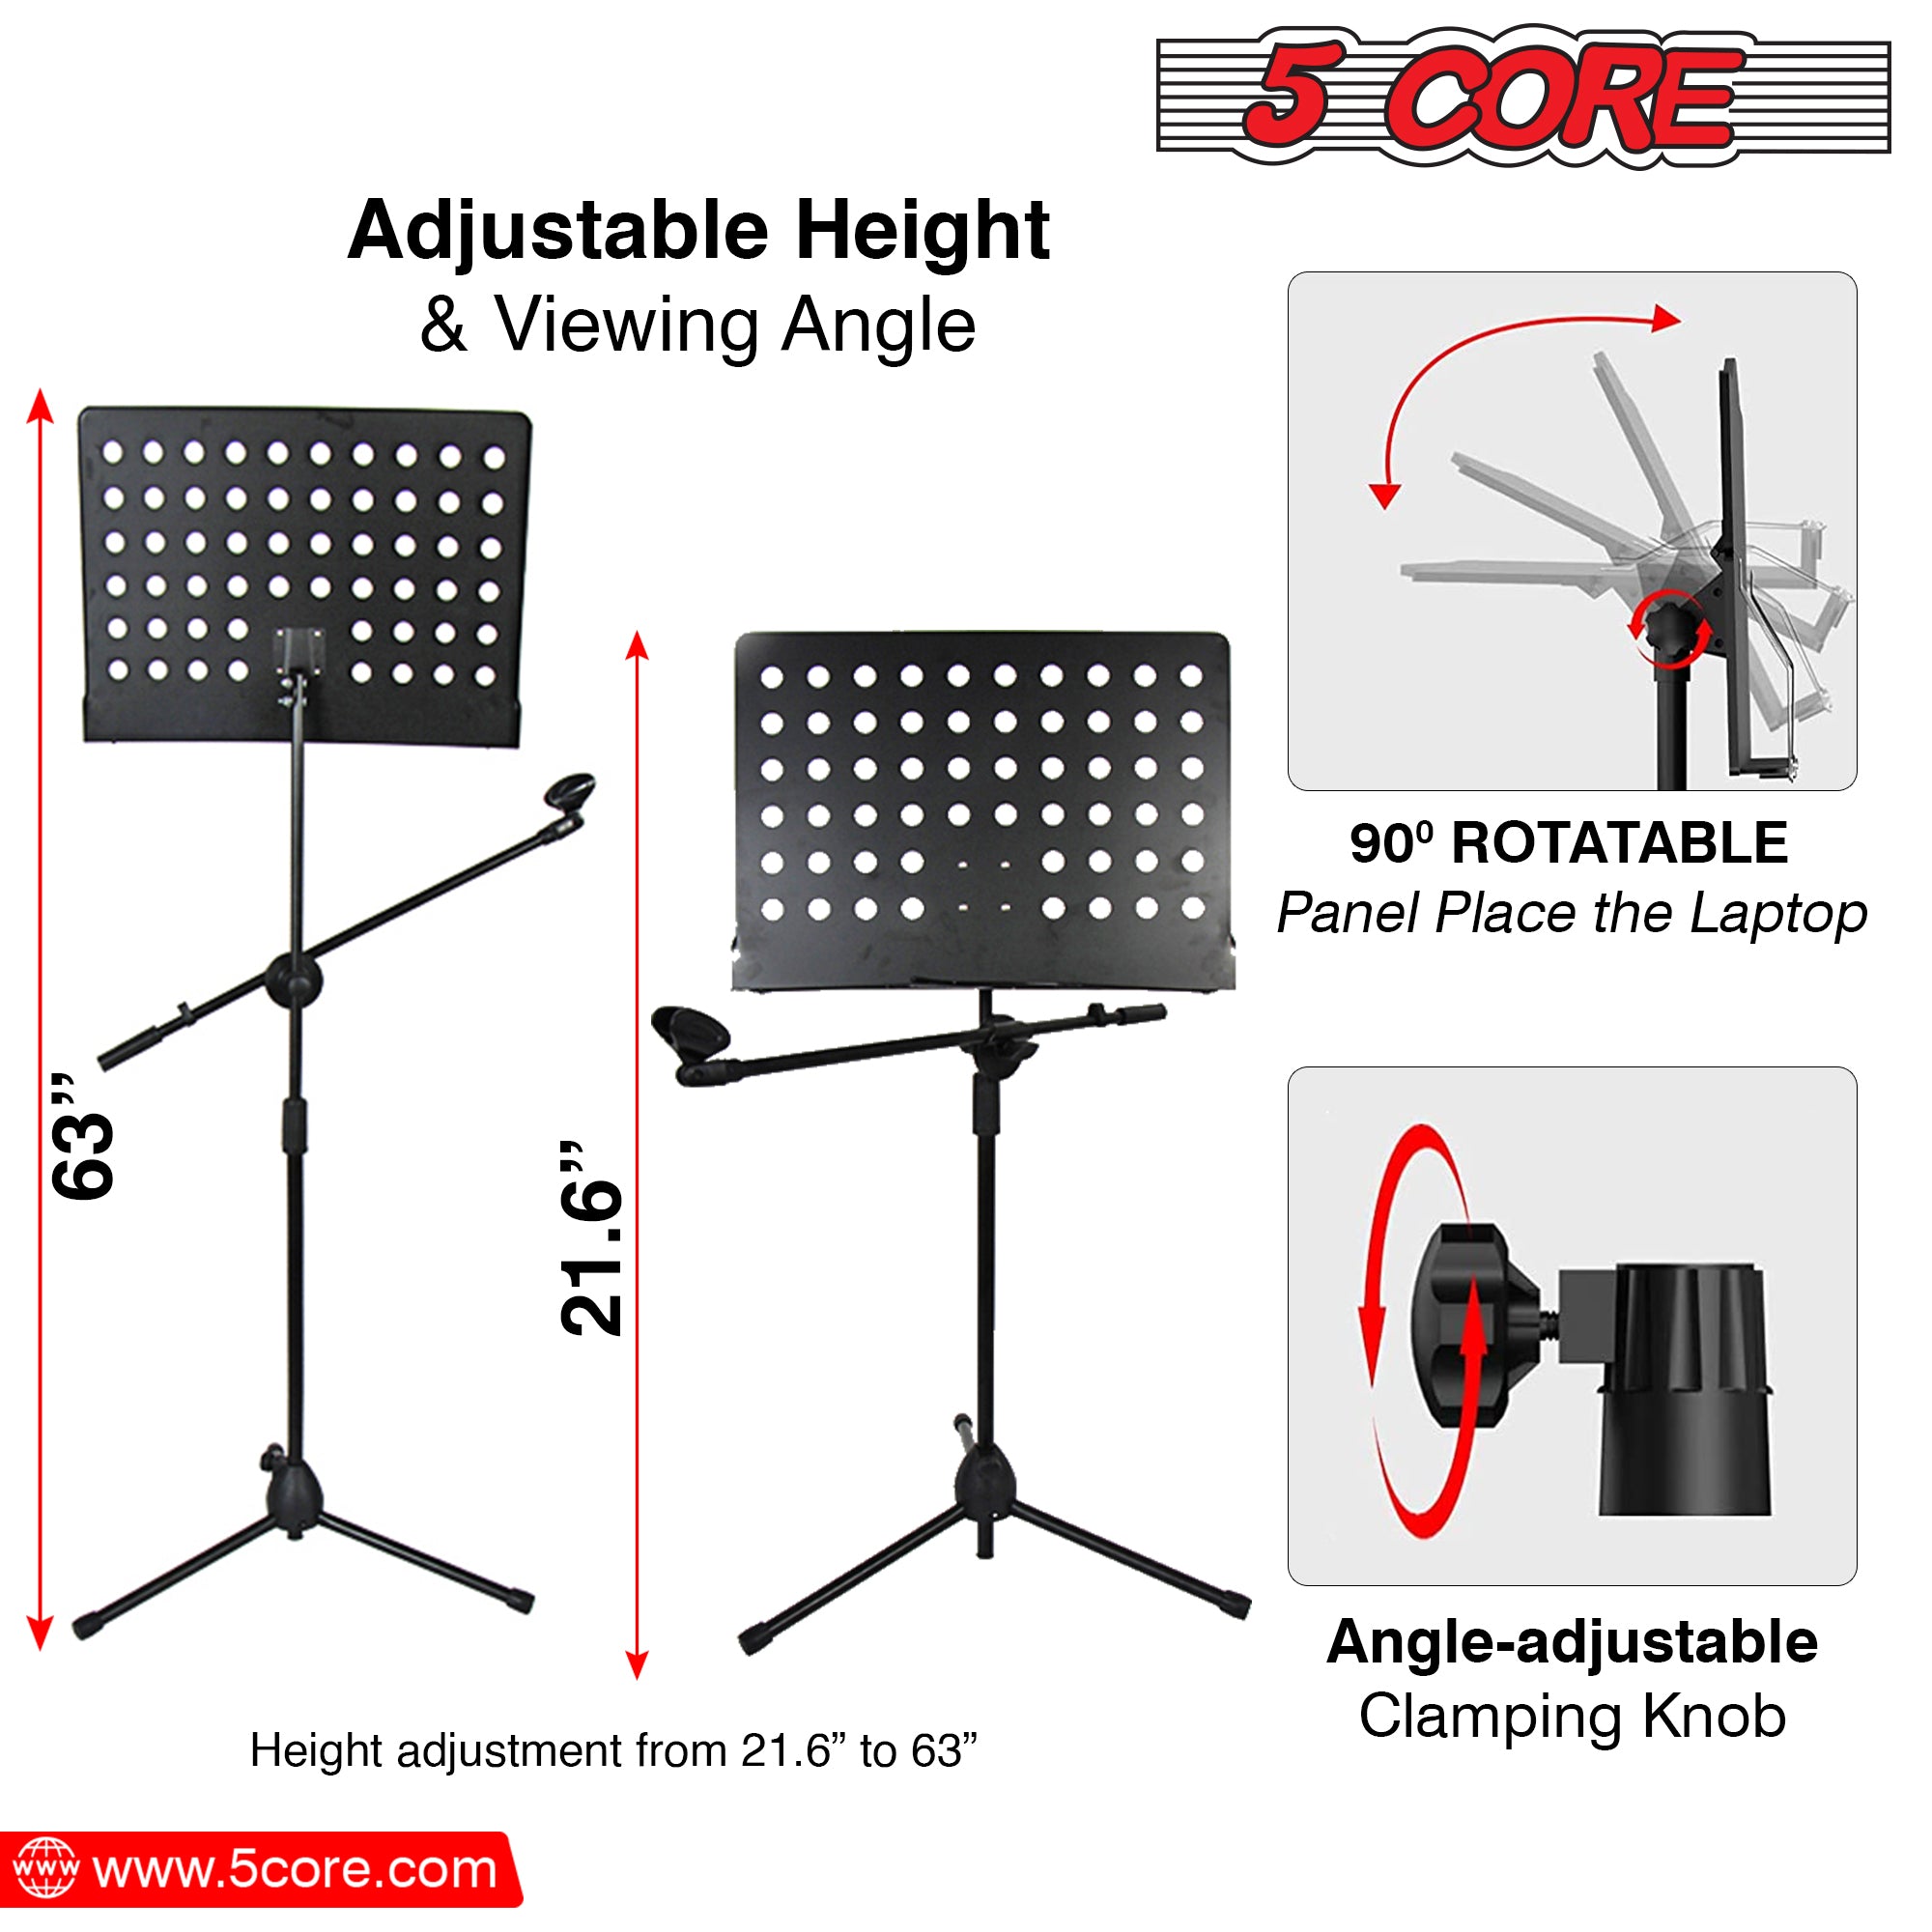 adjustable height & viewing angle